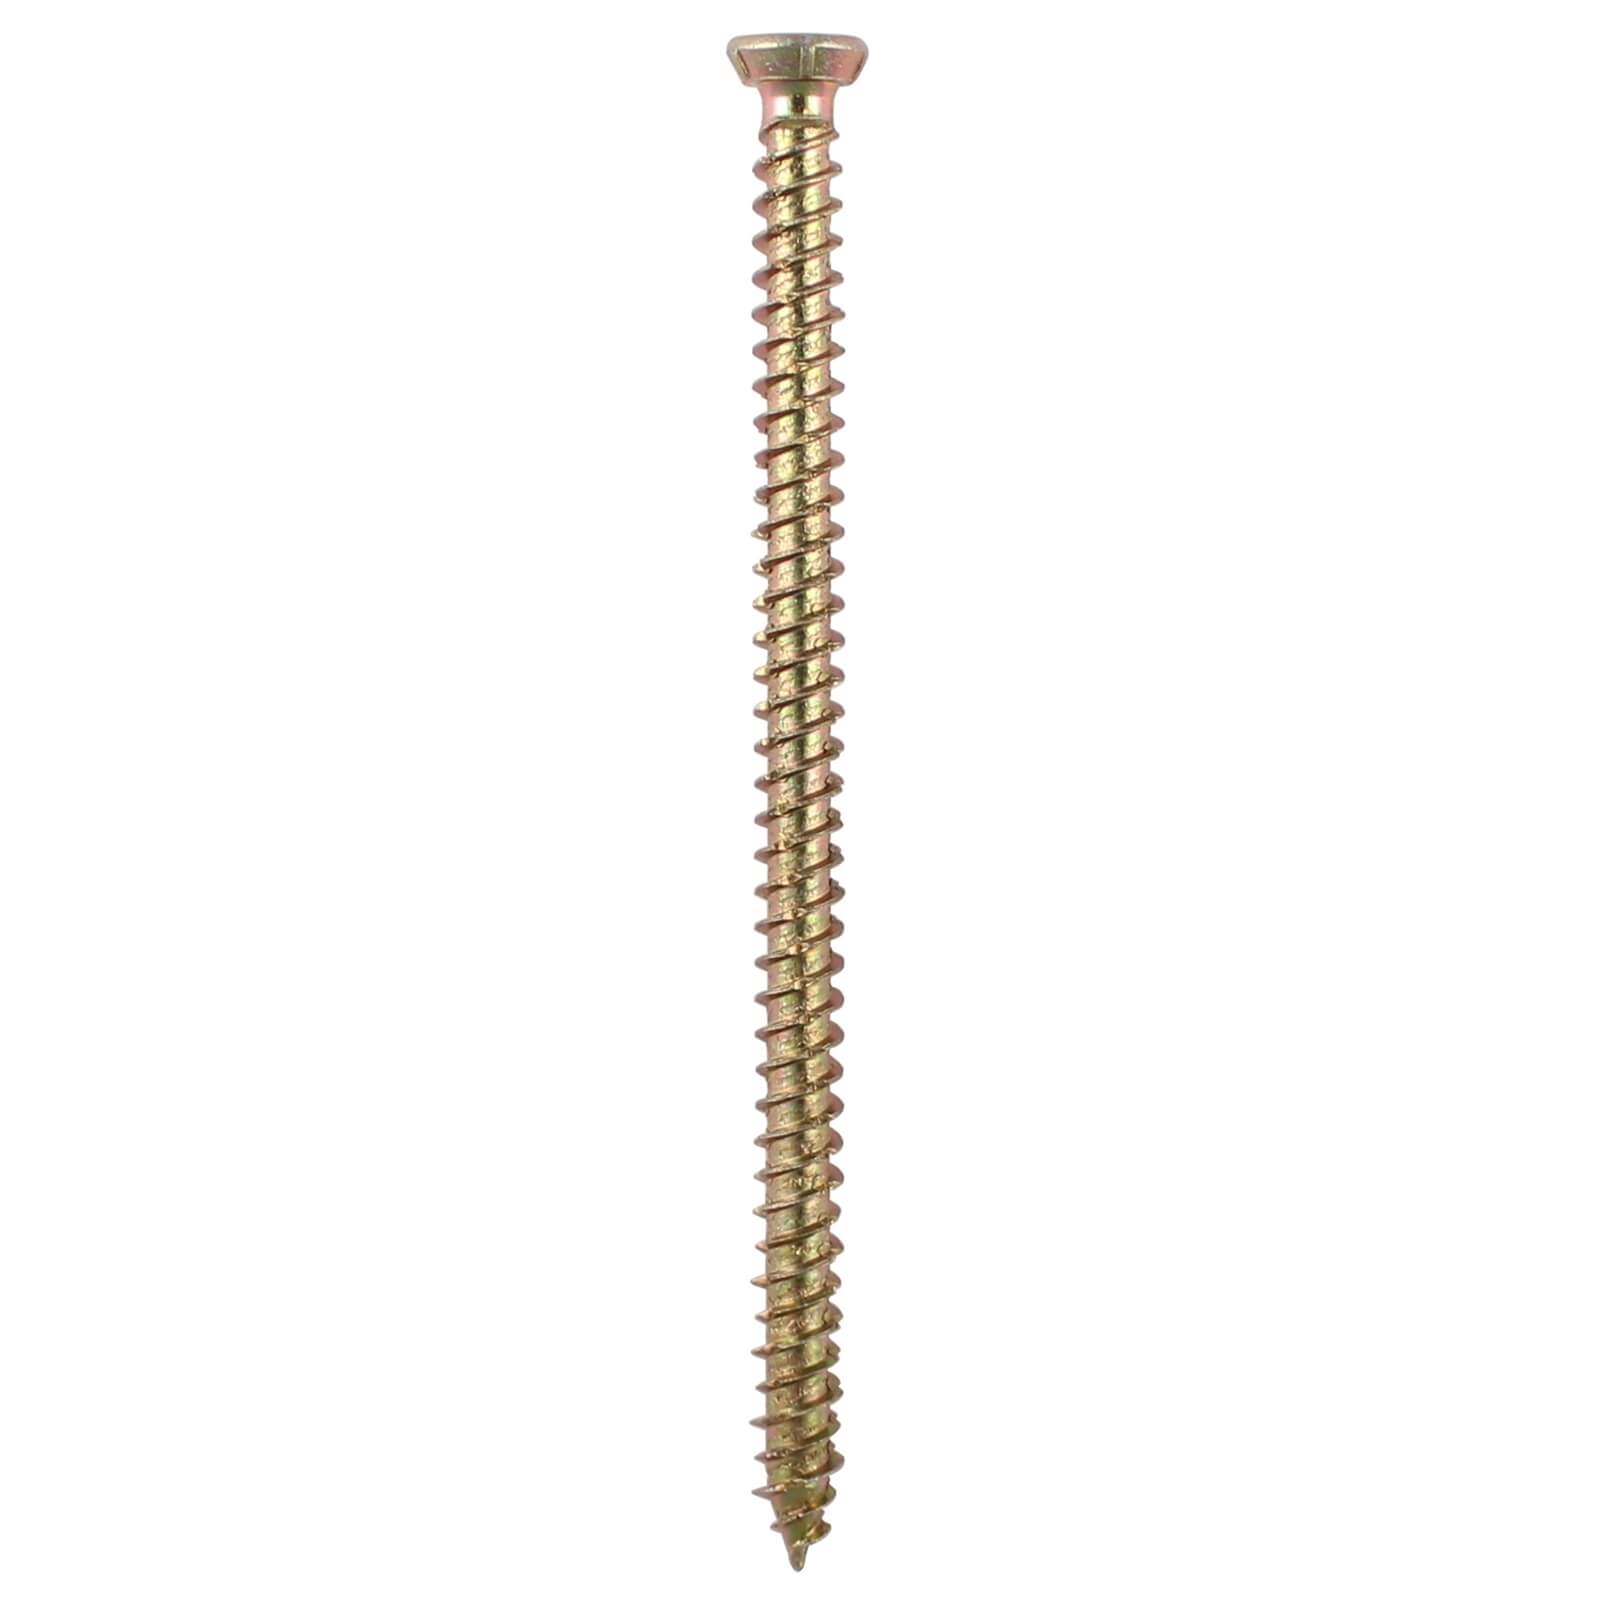 Concrete Screw Zyp 7.5mm x 120mm - Pack of 3